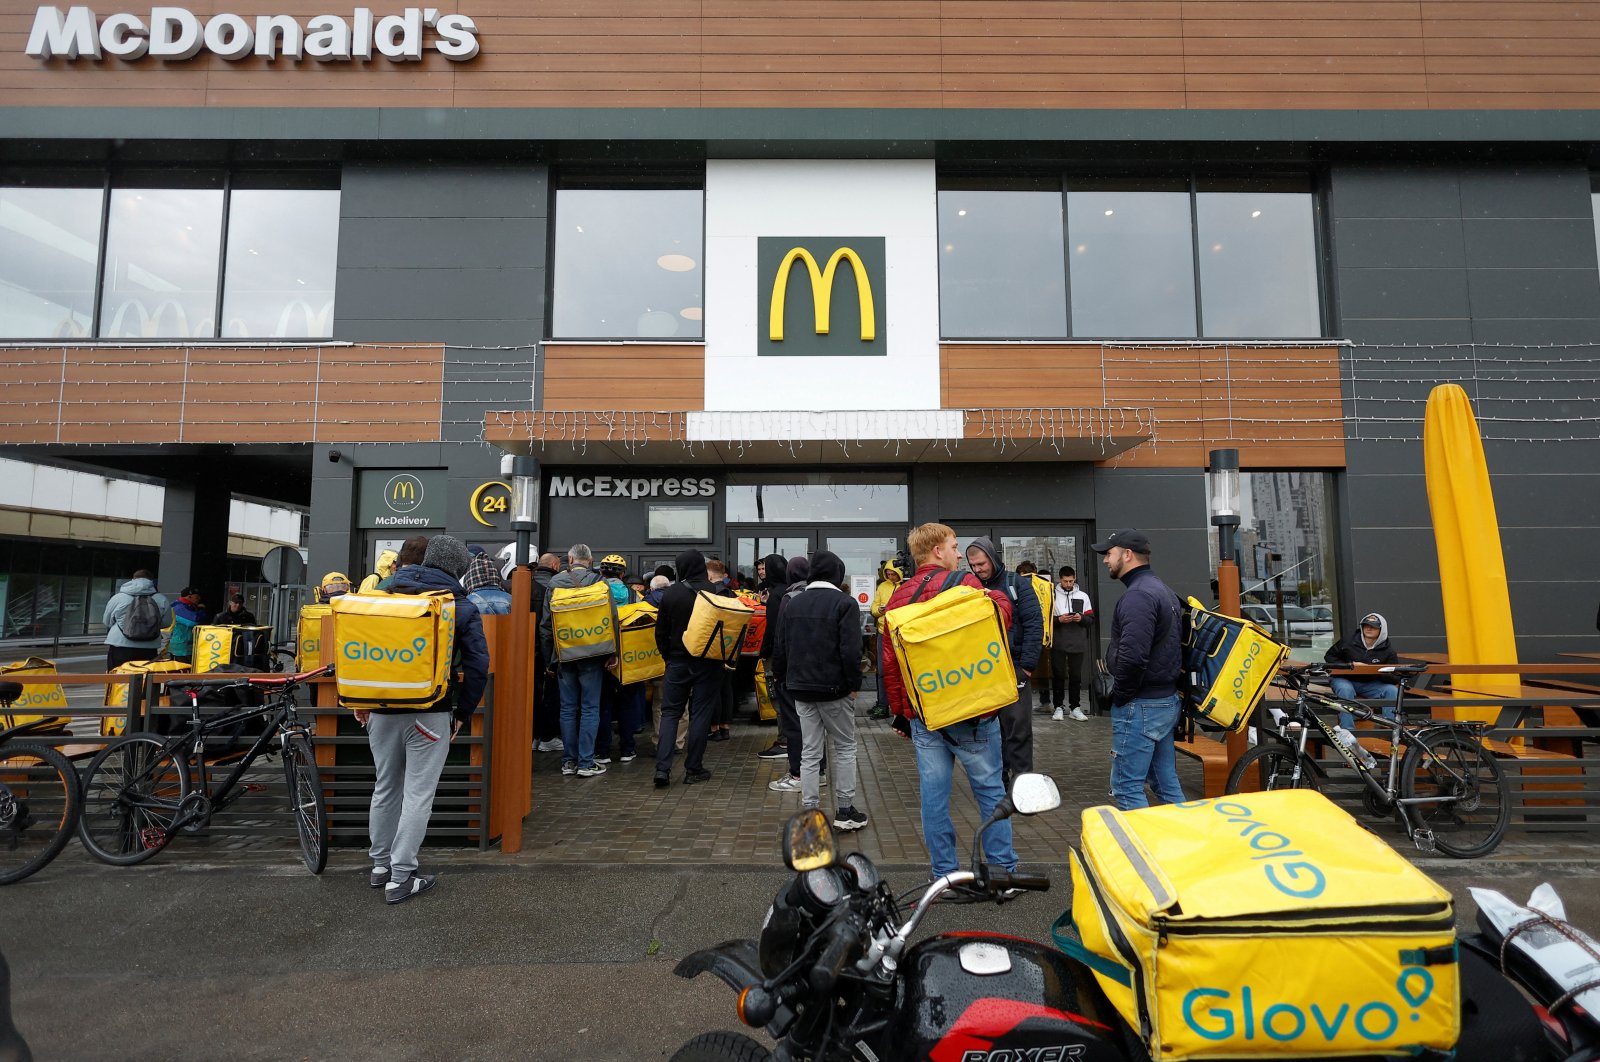 Glovo food delivery couriers wait to pick up orders outside a McDonald&#039;s restaurant, after the chain reopened amid Russia&#039;s attack on Ukraine, in Kyiv, Ukraine, Sept. 20, 2022. (Reuters Photo)